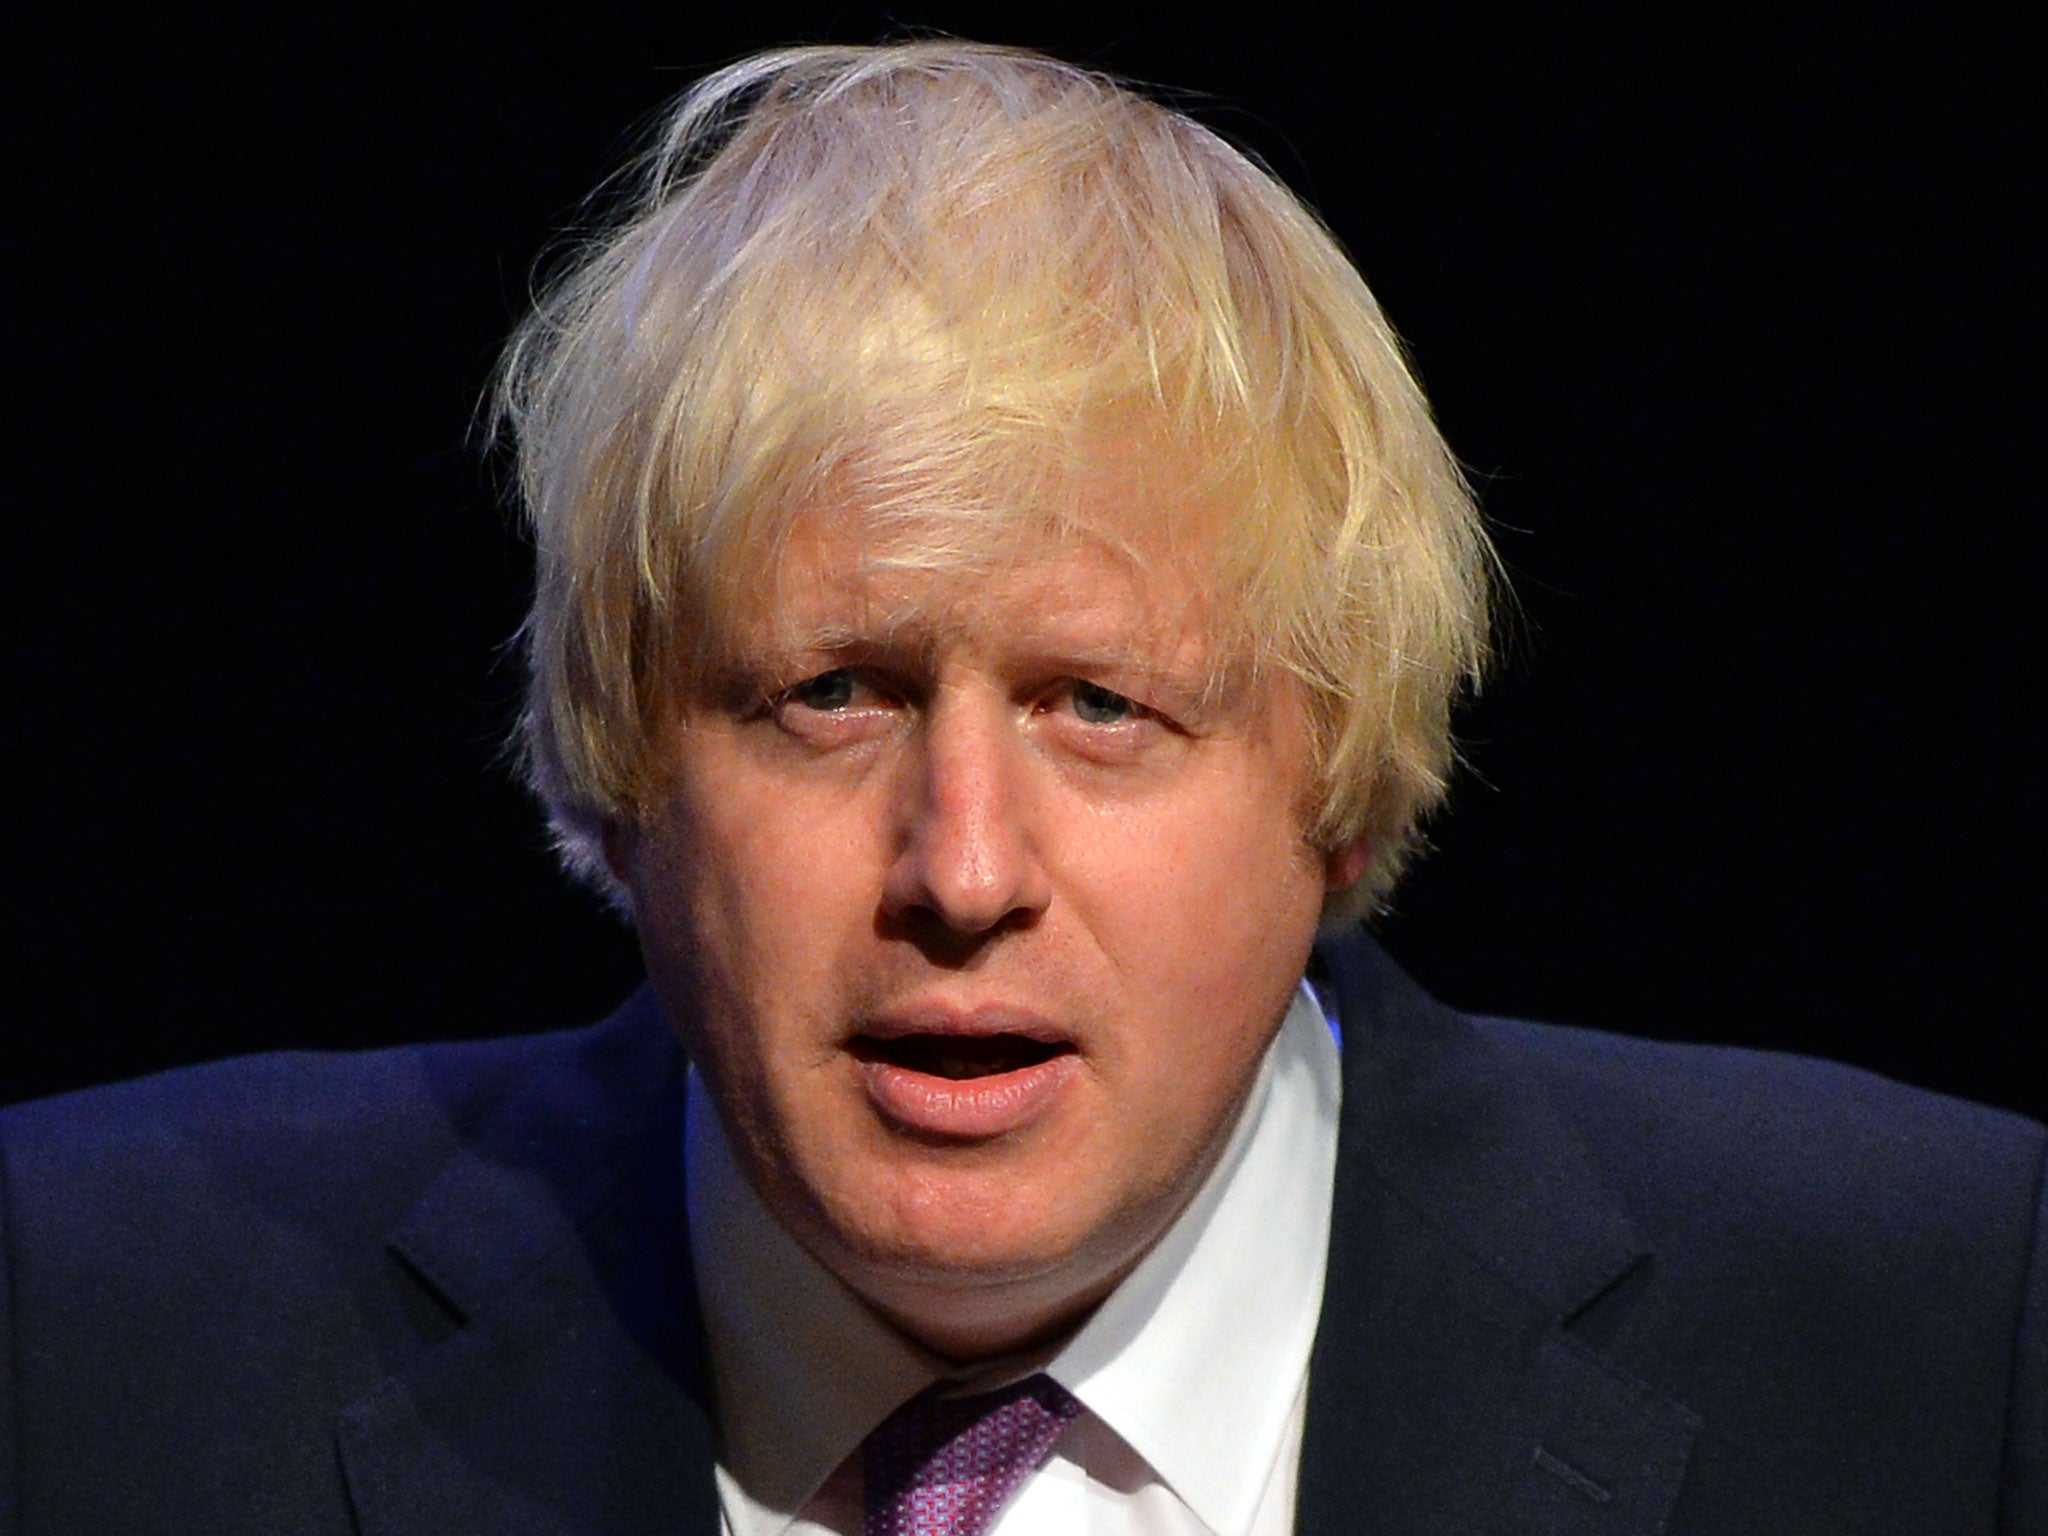 London Mayor Boris Johnson said the UK should not "slam the door" on wealth foreigners buying property in the capital